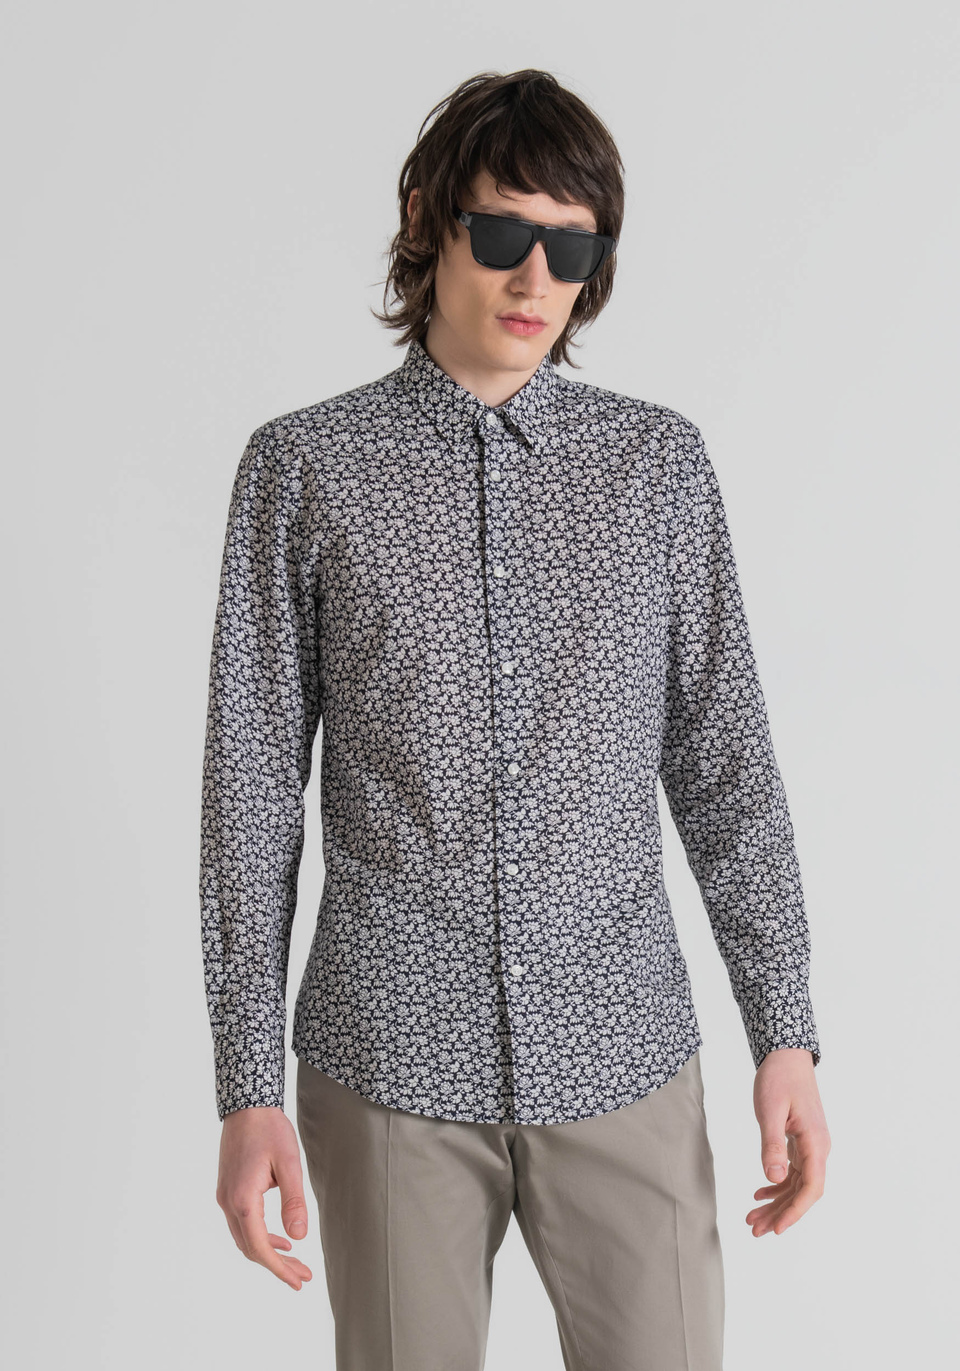 SLIM-FIT “NAPOLI” SHIRT IN 100% COTTON WITH AN ALL-OVER MICRO-FLOWER PRINT PATTERN - Antony Morato Online Shop